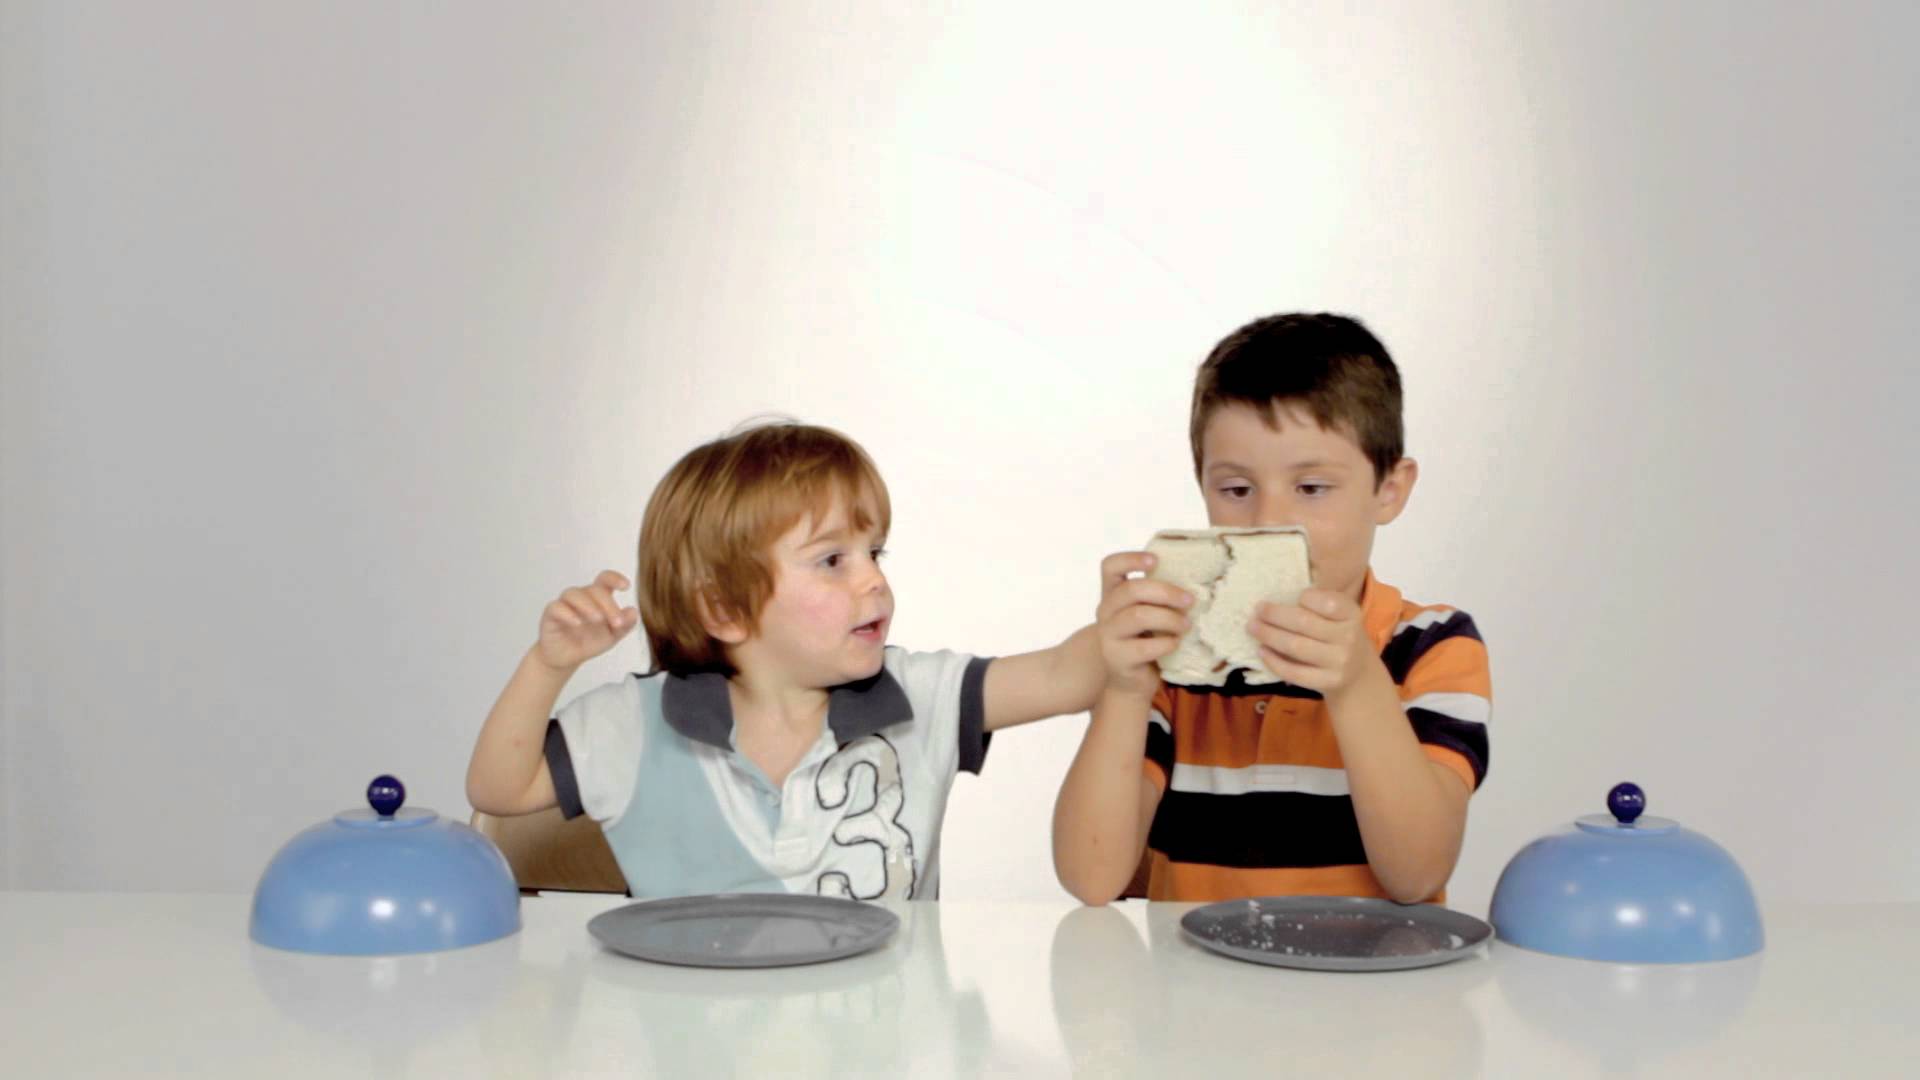 Watch This Video To See What Happens When Two Kids Are Given Only One Sandwich